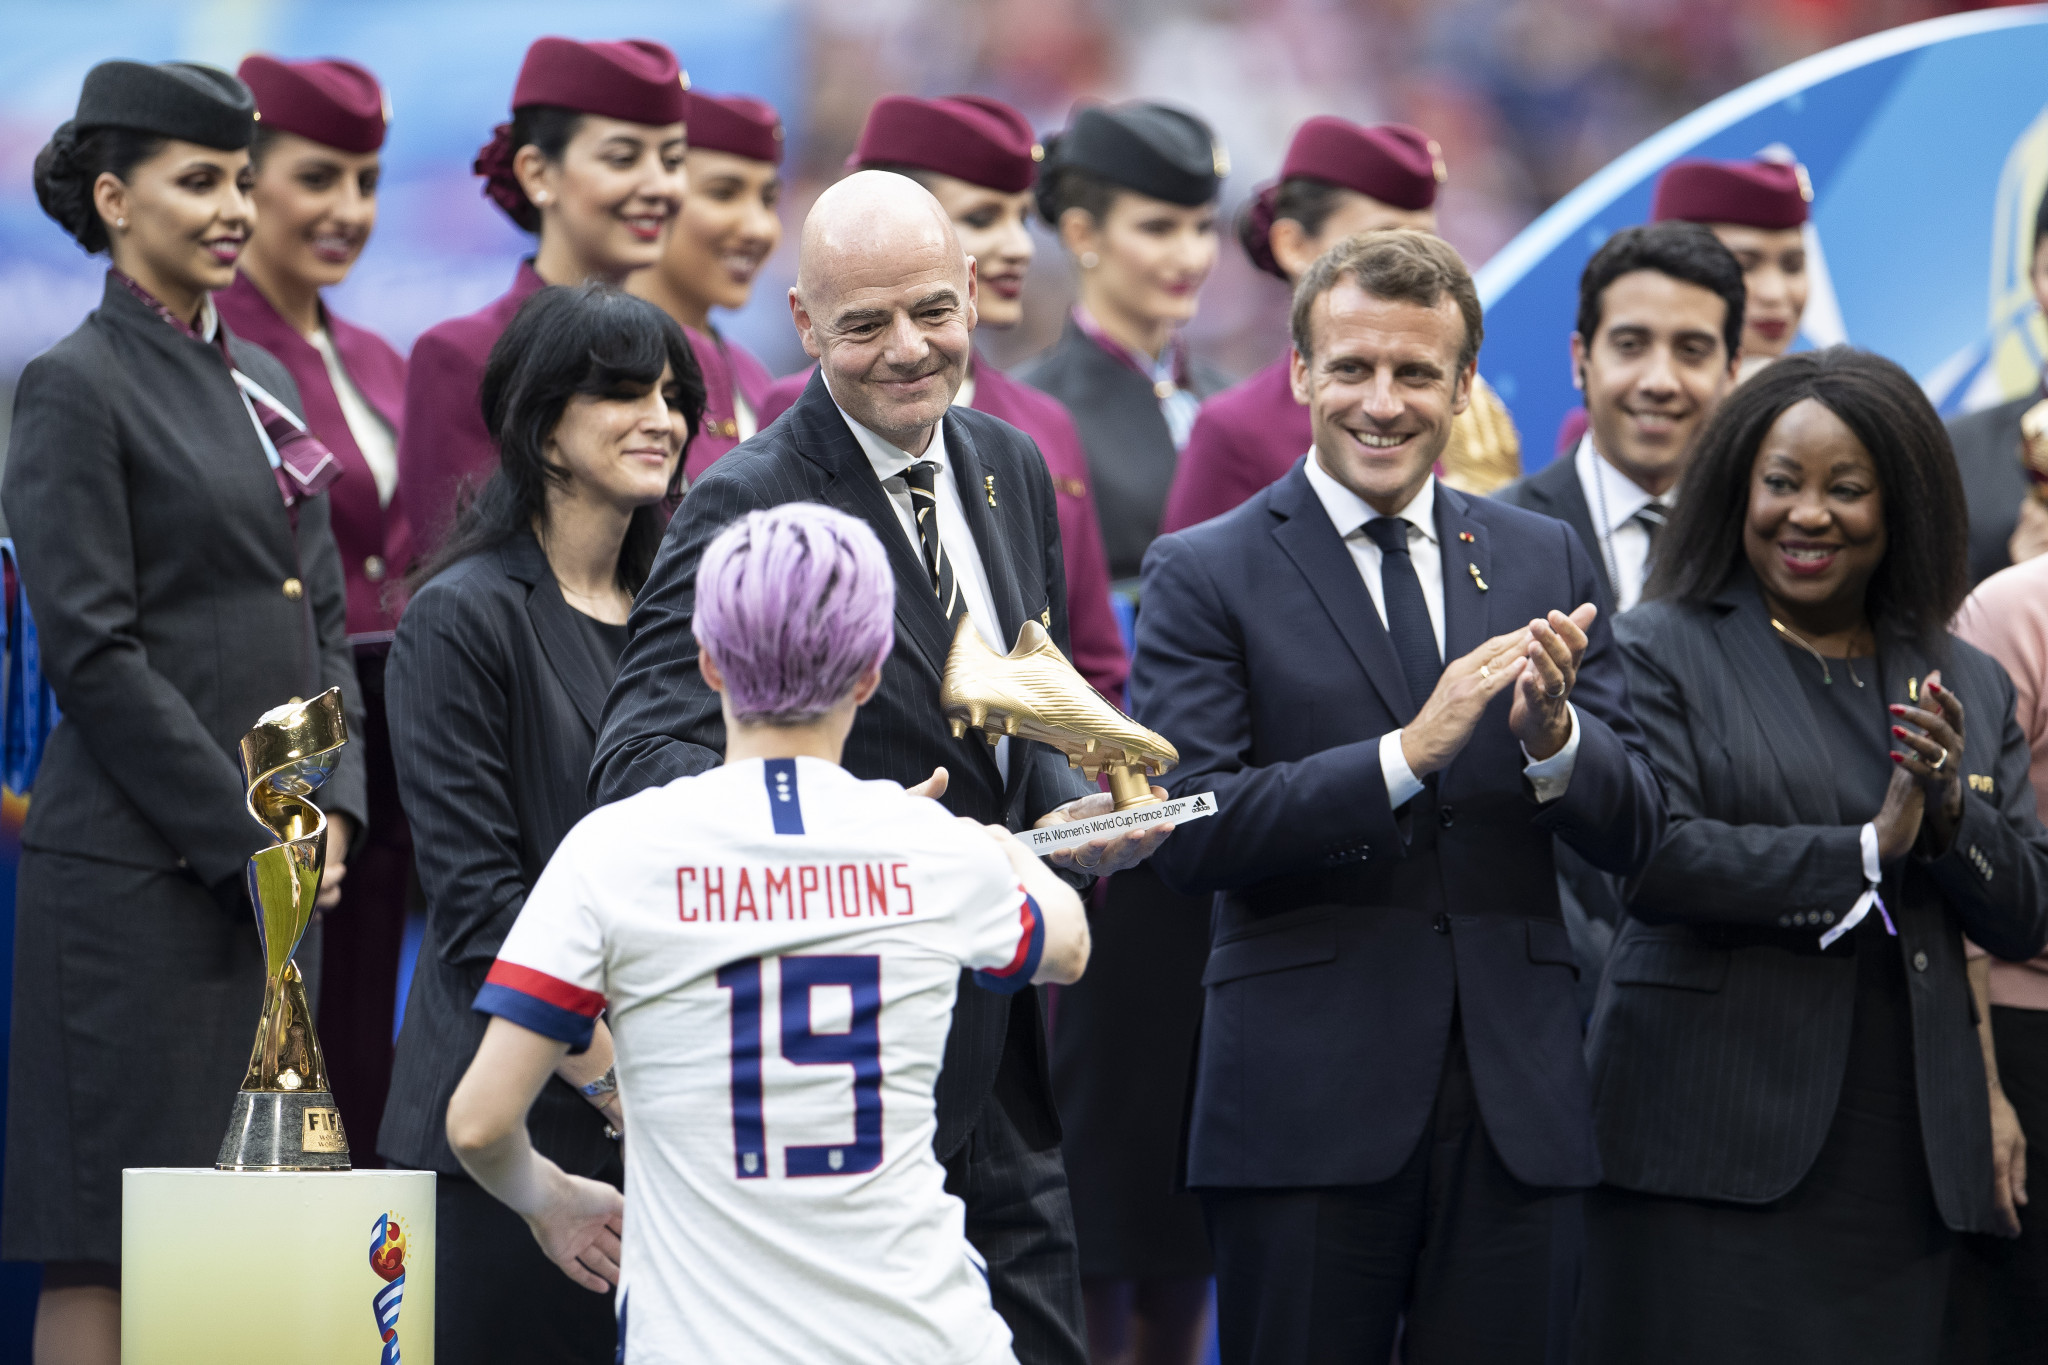 The expansion of the Women's World Cup has been spearheaded by FIFA President Gianni Infantino ©Getty Images